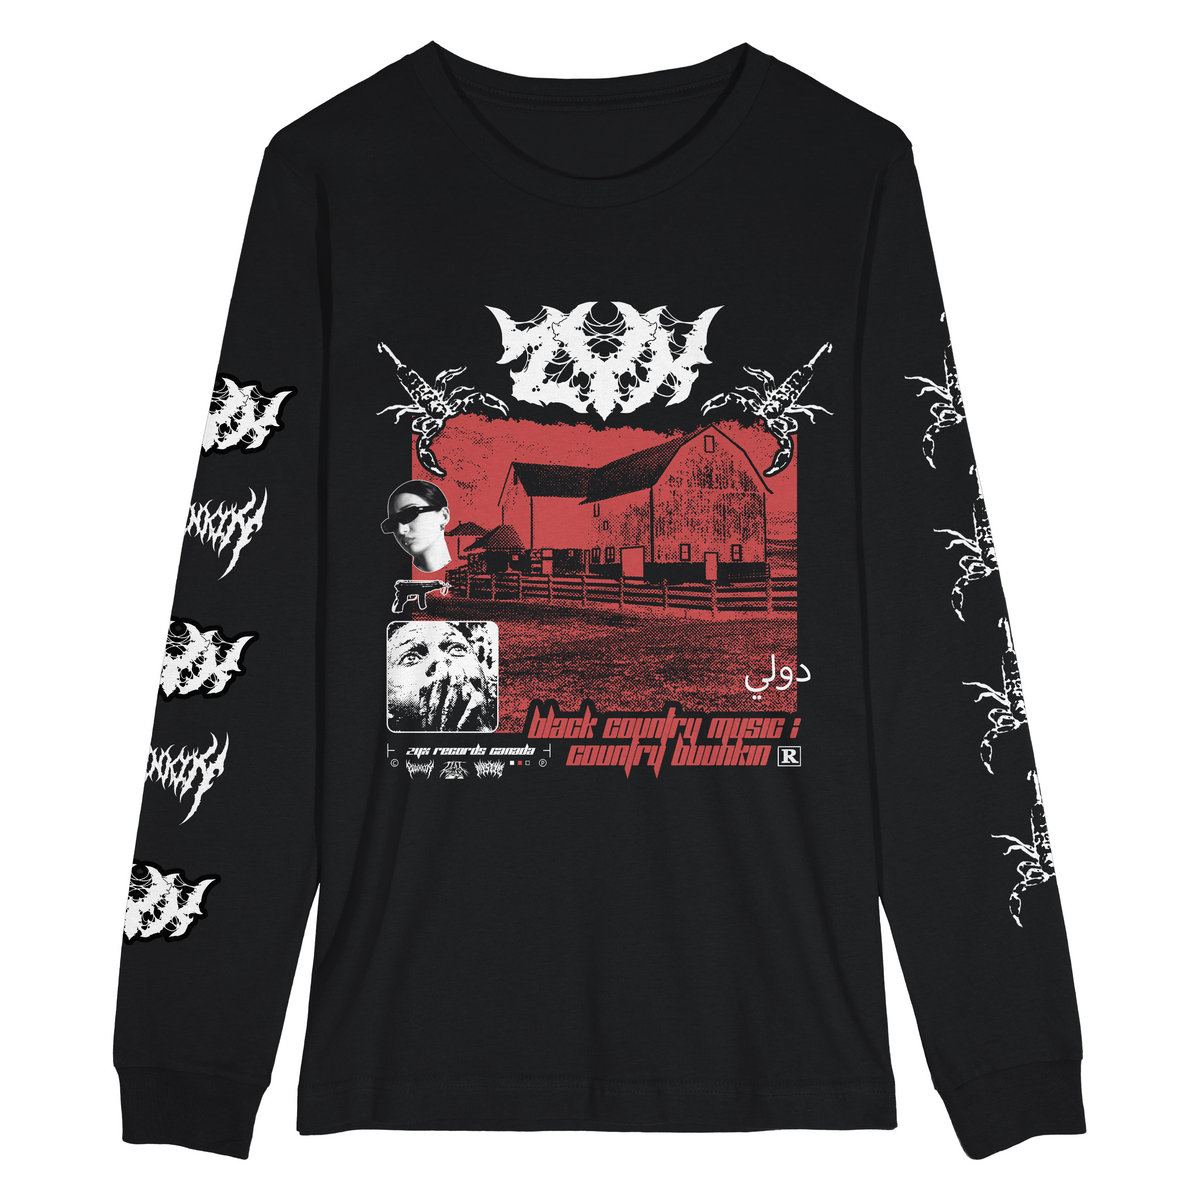 BLACK COUNTRY MUSIC SHIRT | ZYX RECORDS